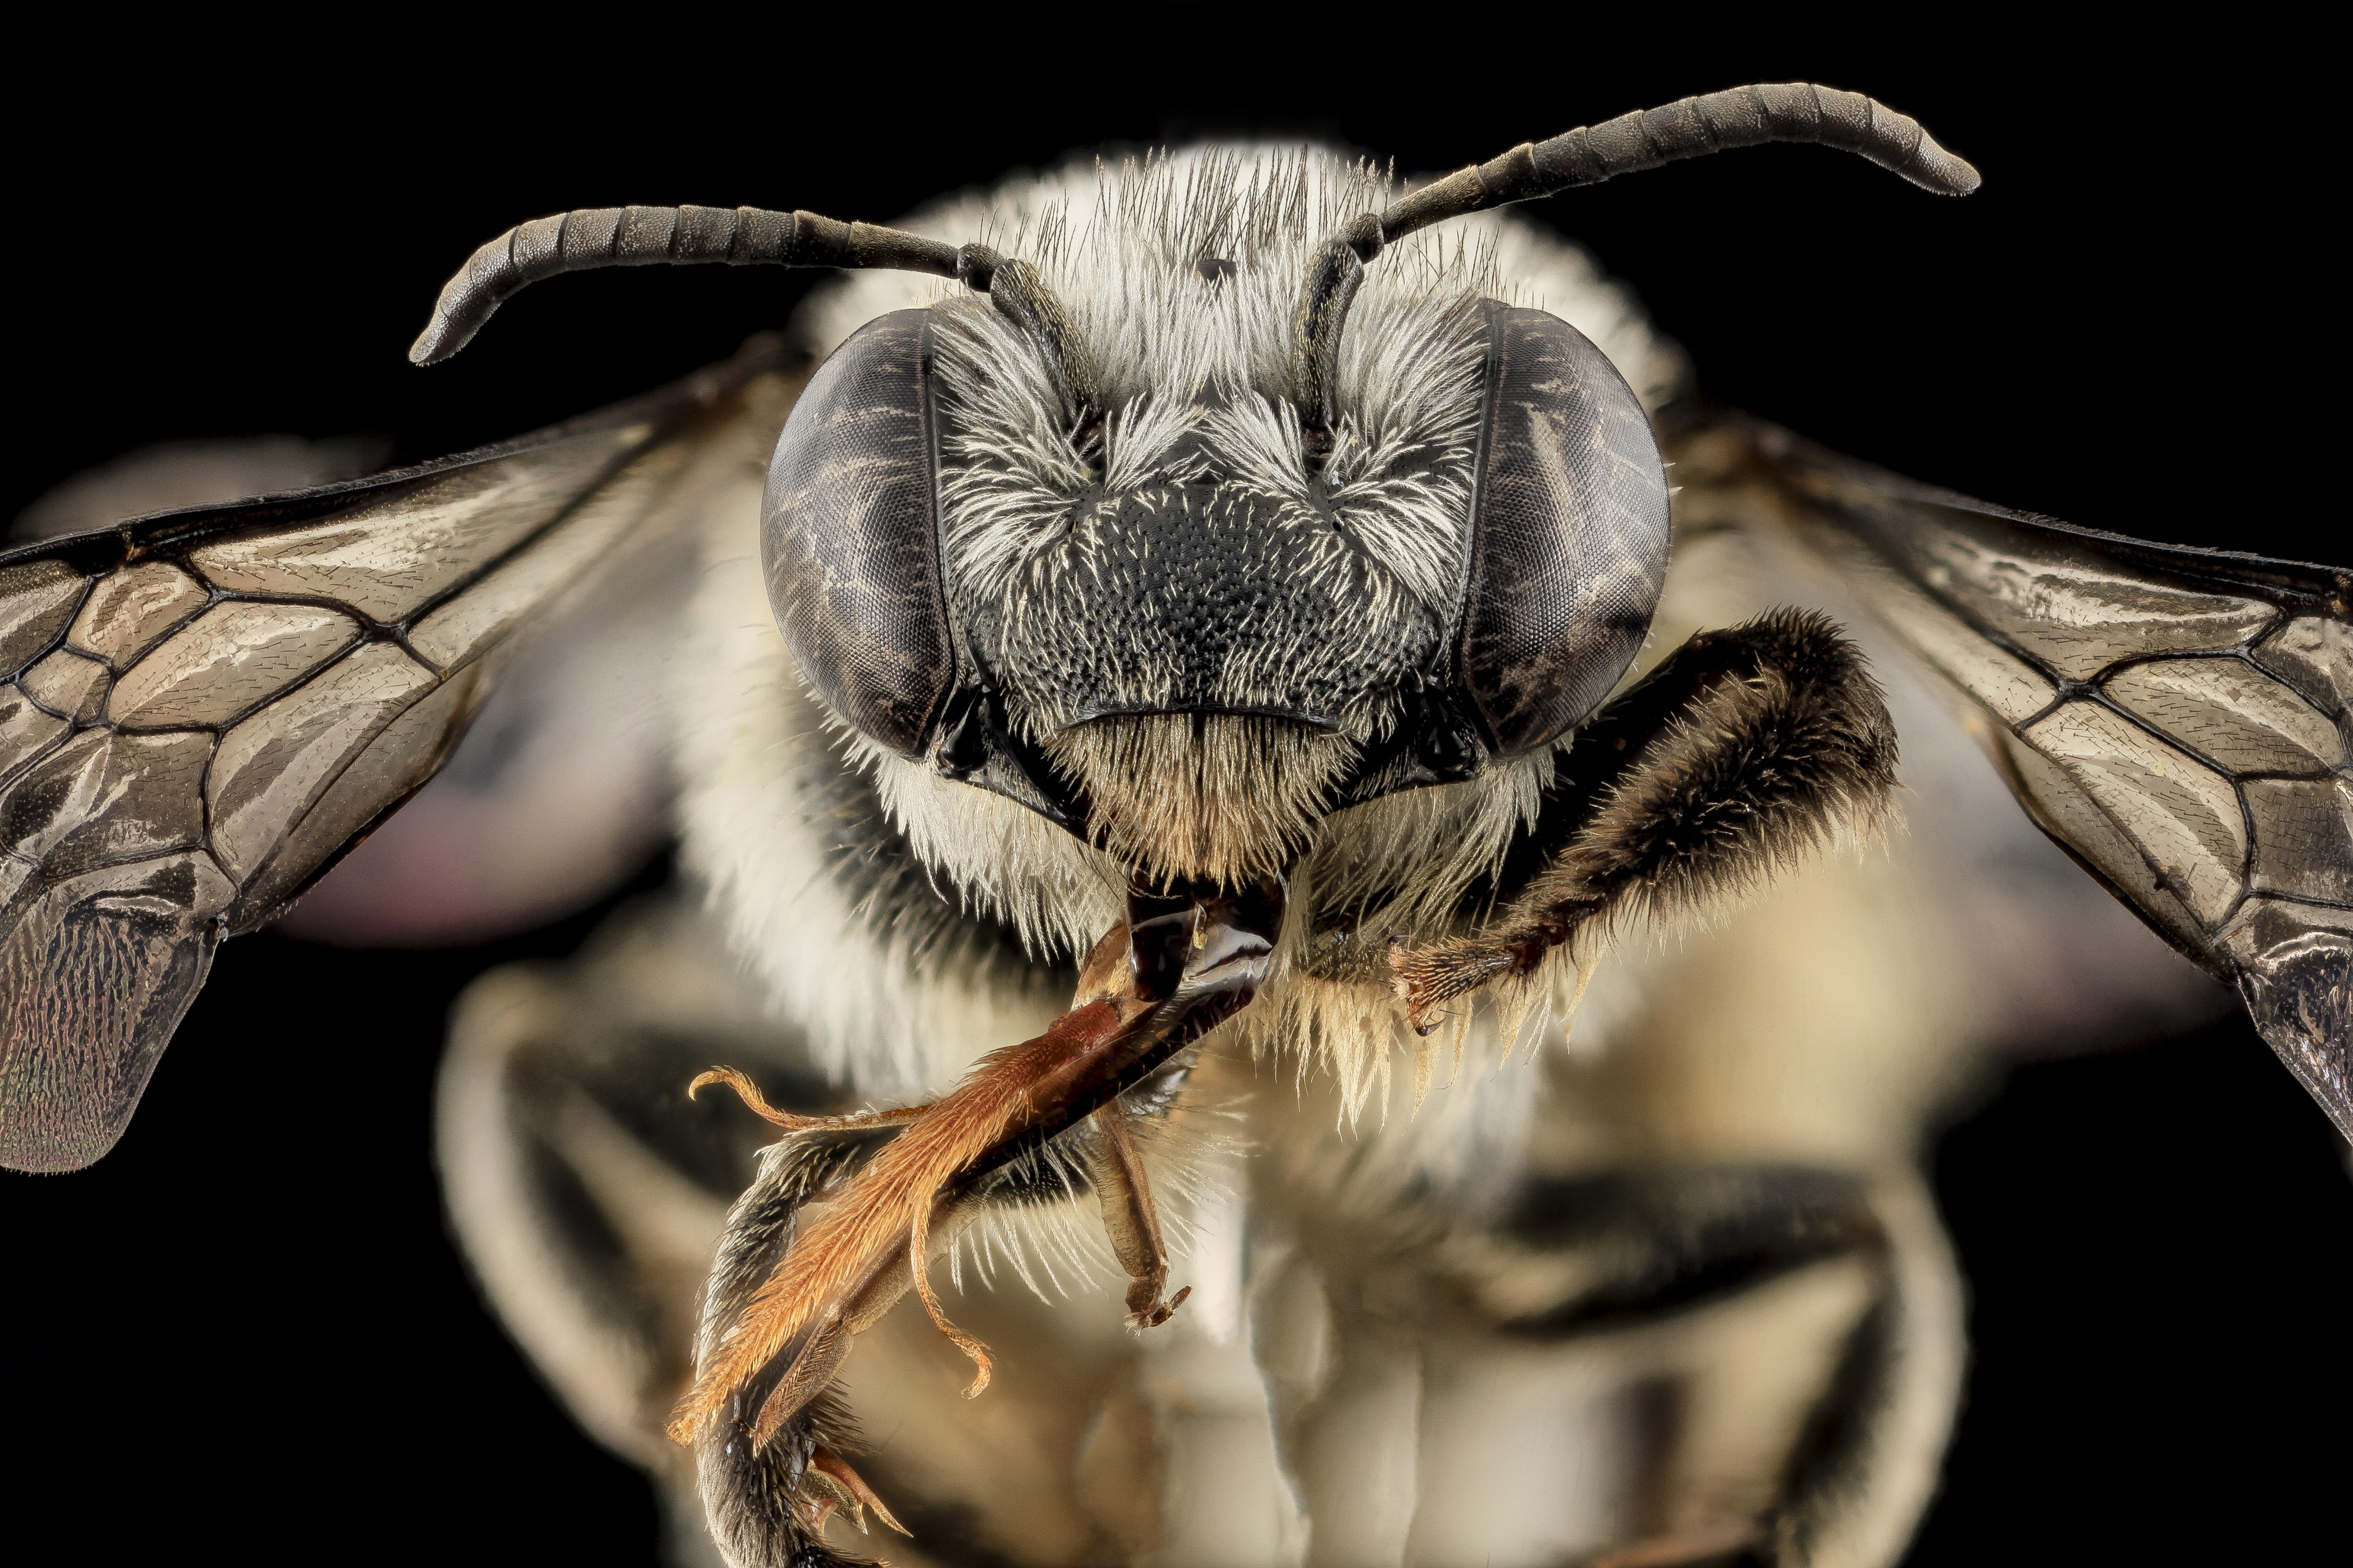 Melissodes denticulata, F, Face, Carroll Co., MD 2013-11-19-08.21.15 ZS PMax (11001874373)